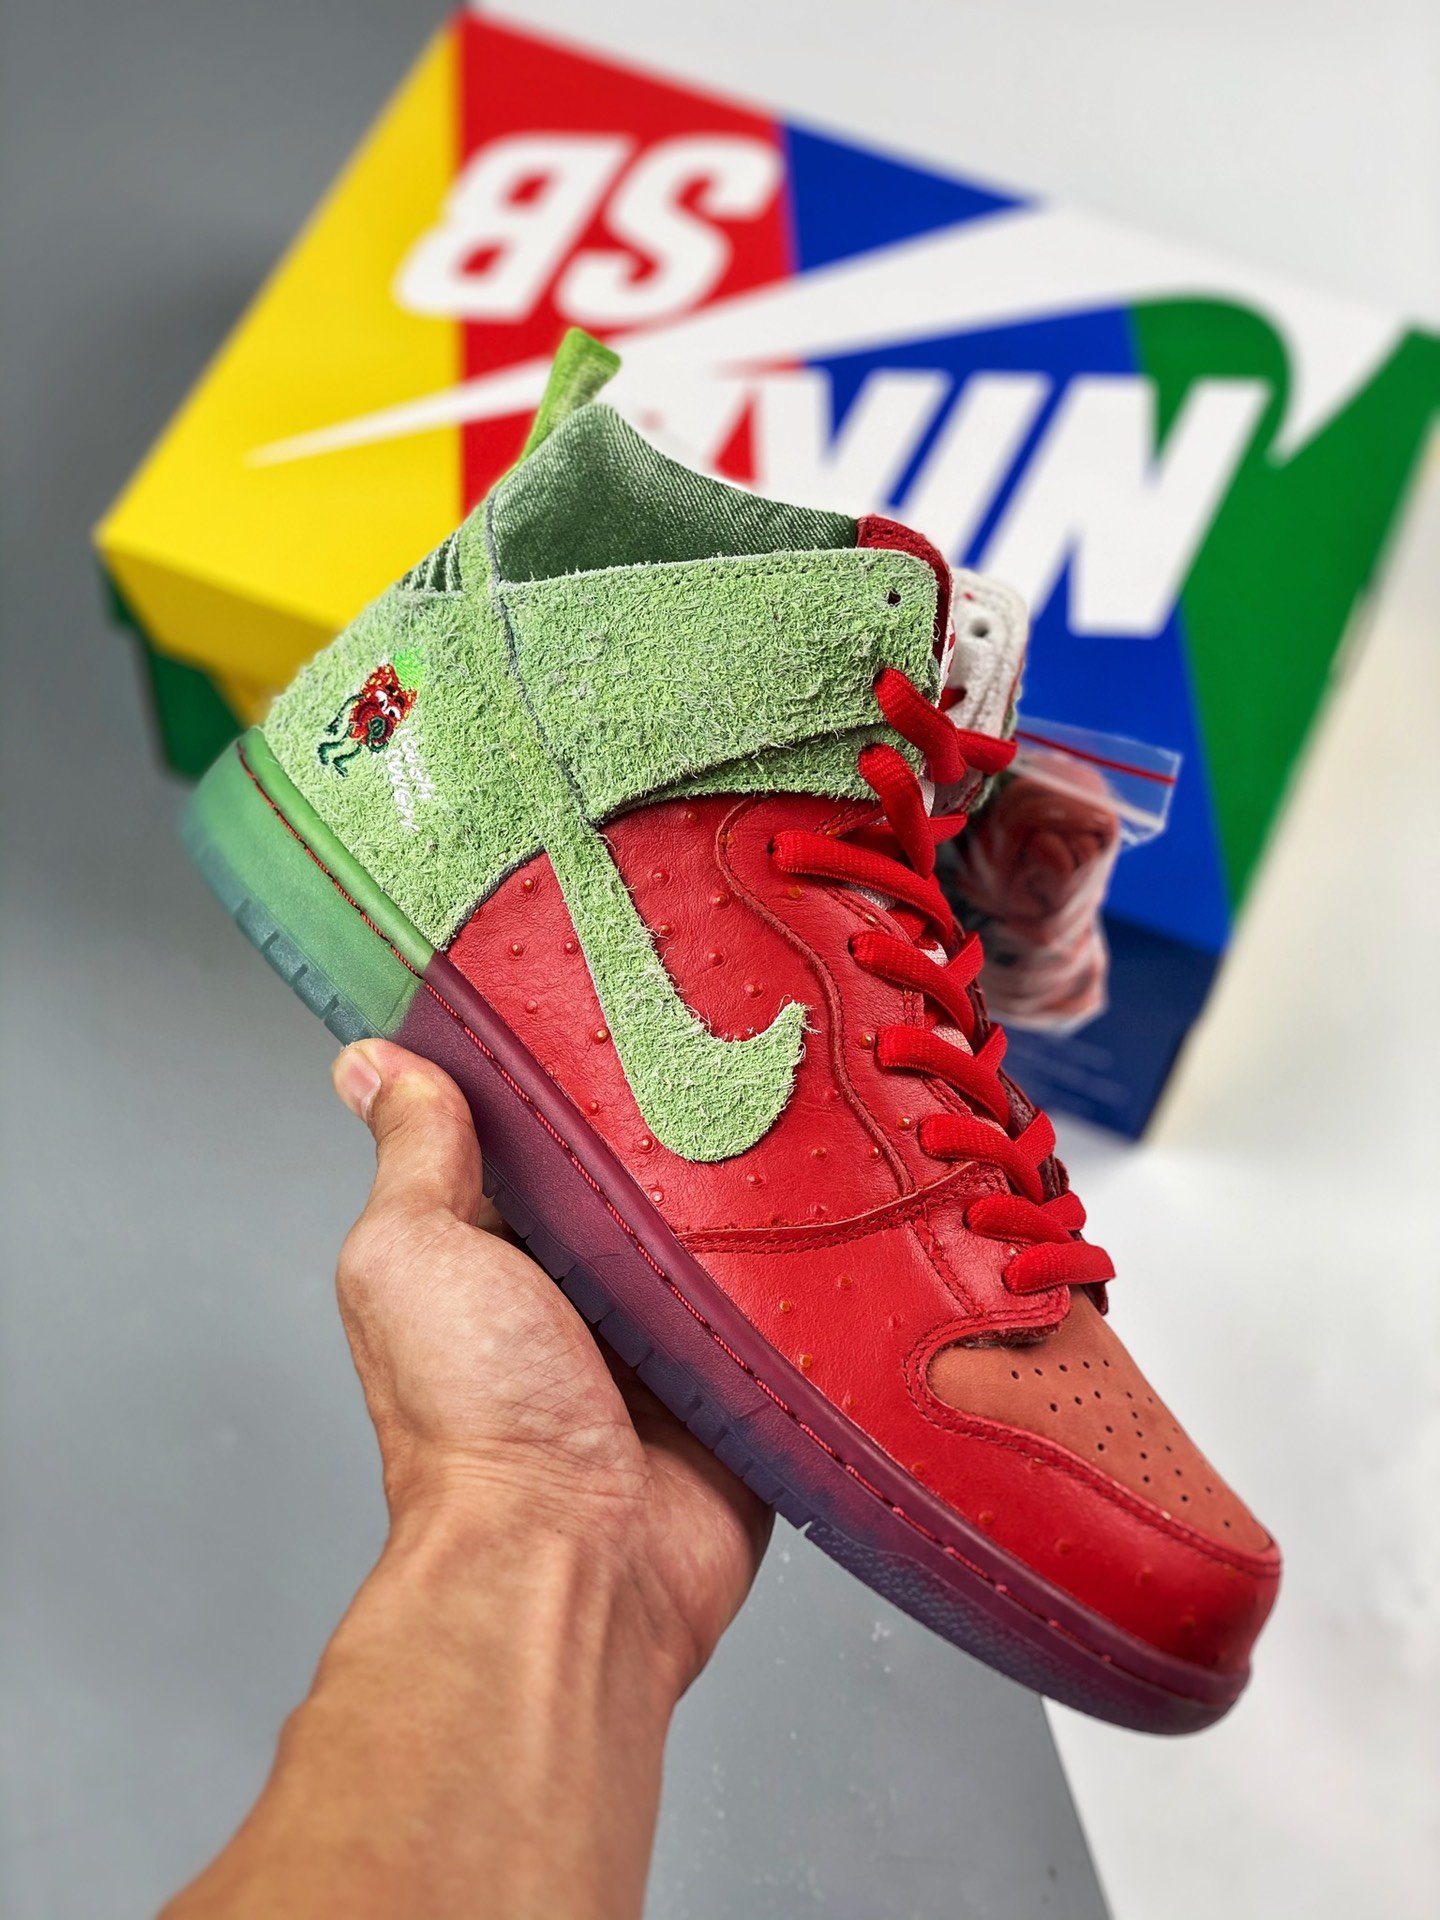 Nike SB Dunk High "Strawberry Cough" CW7093-600 Shoes